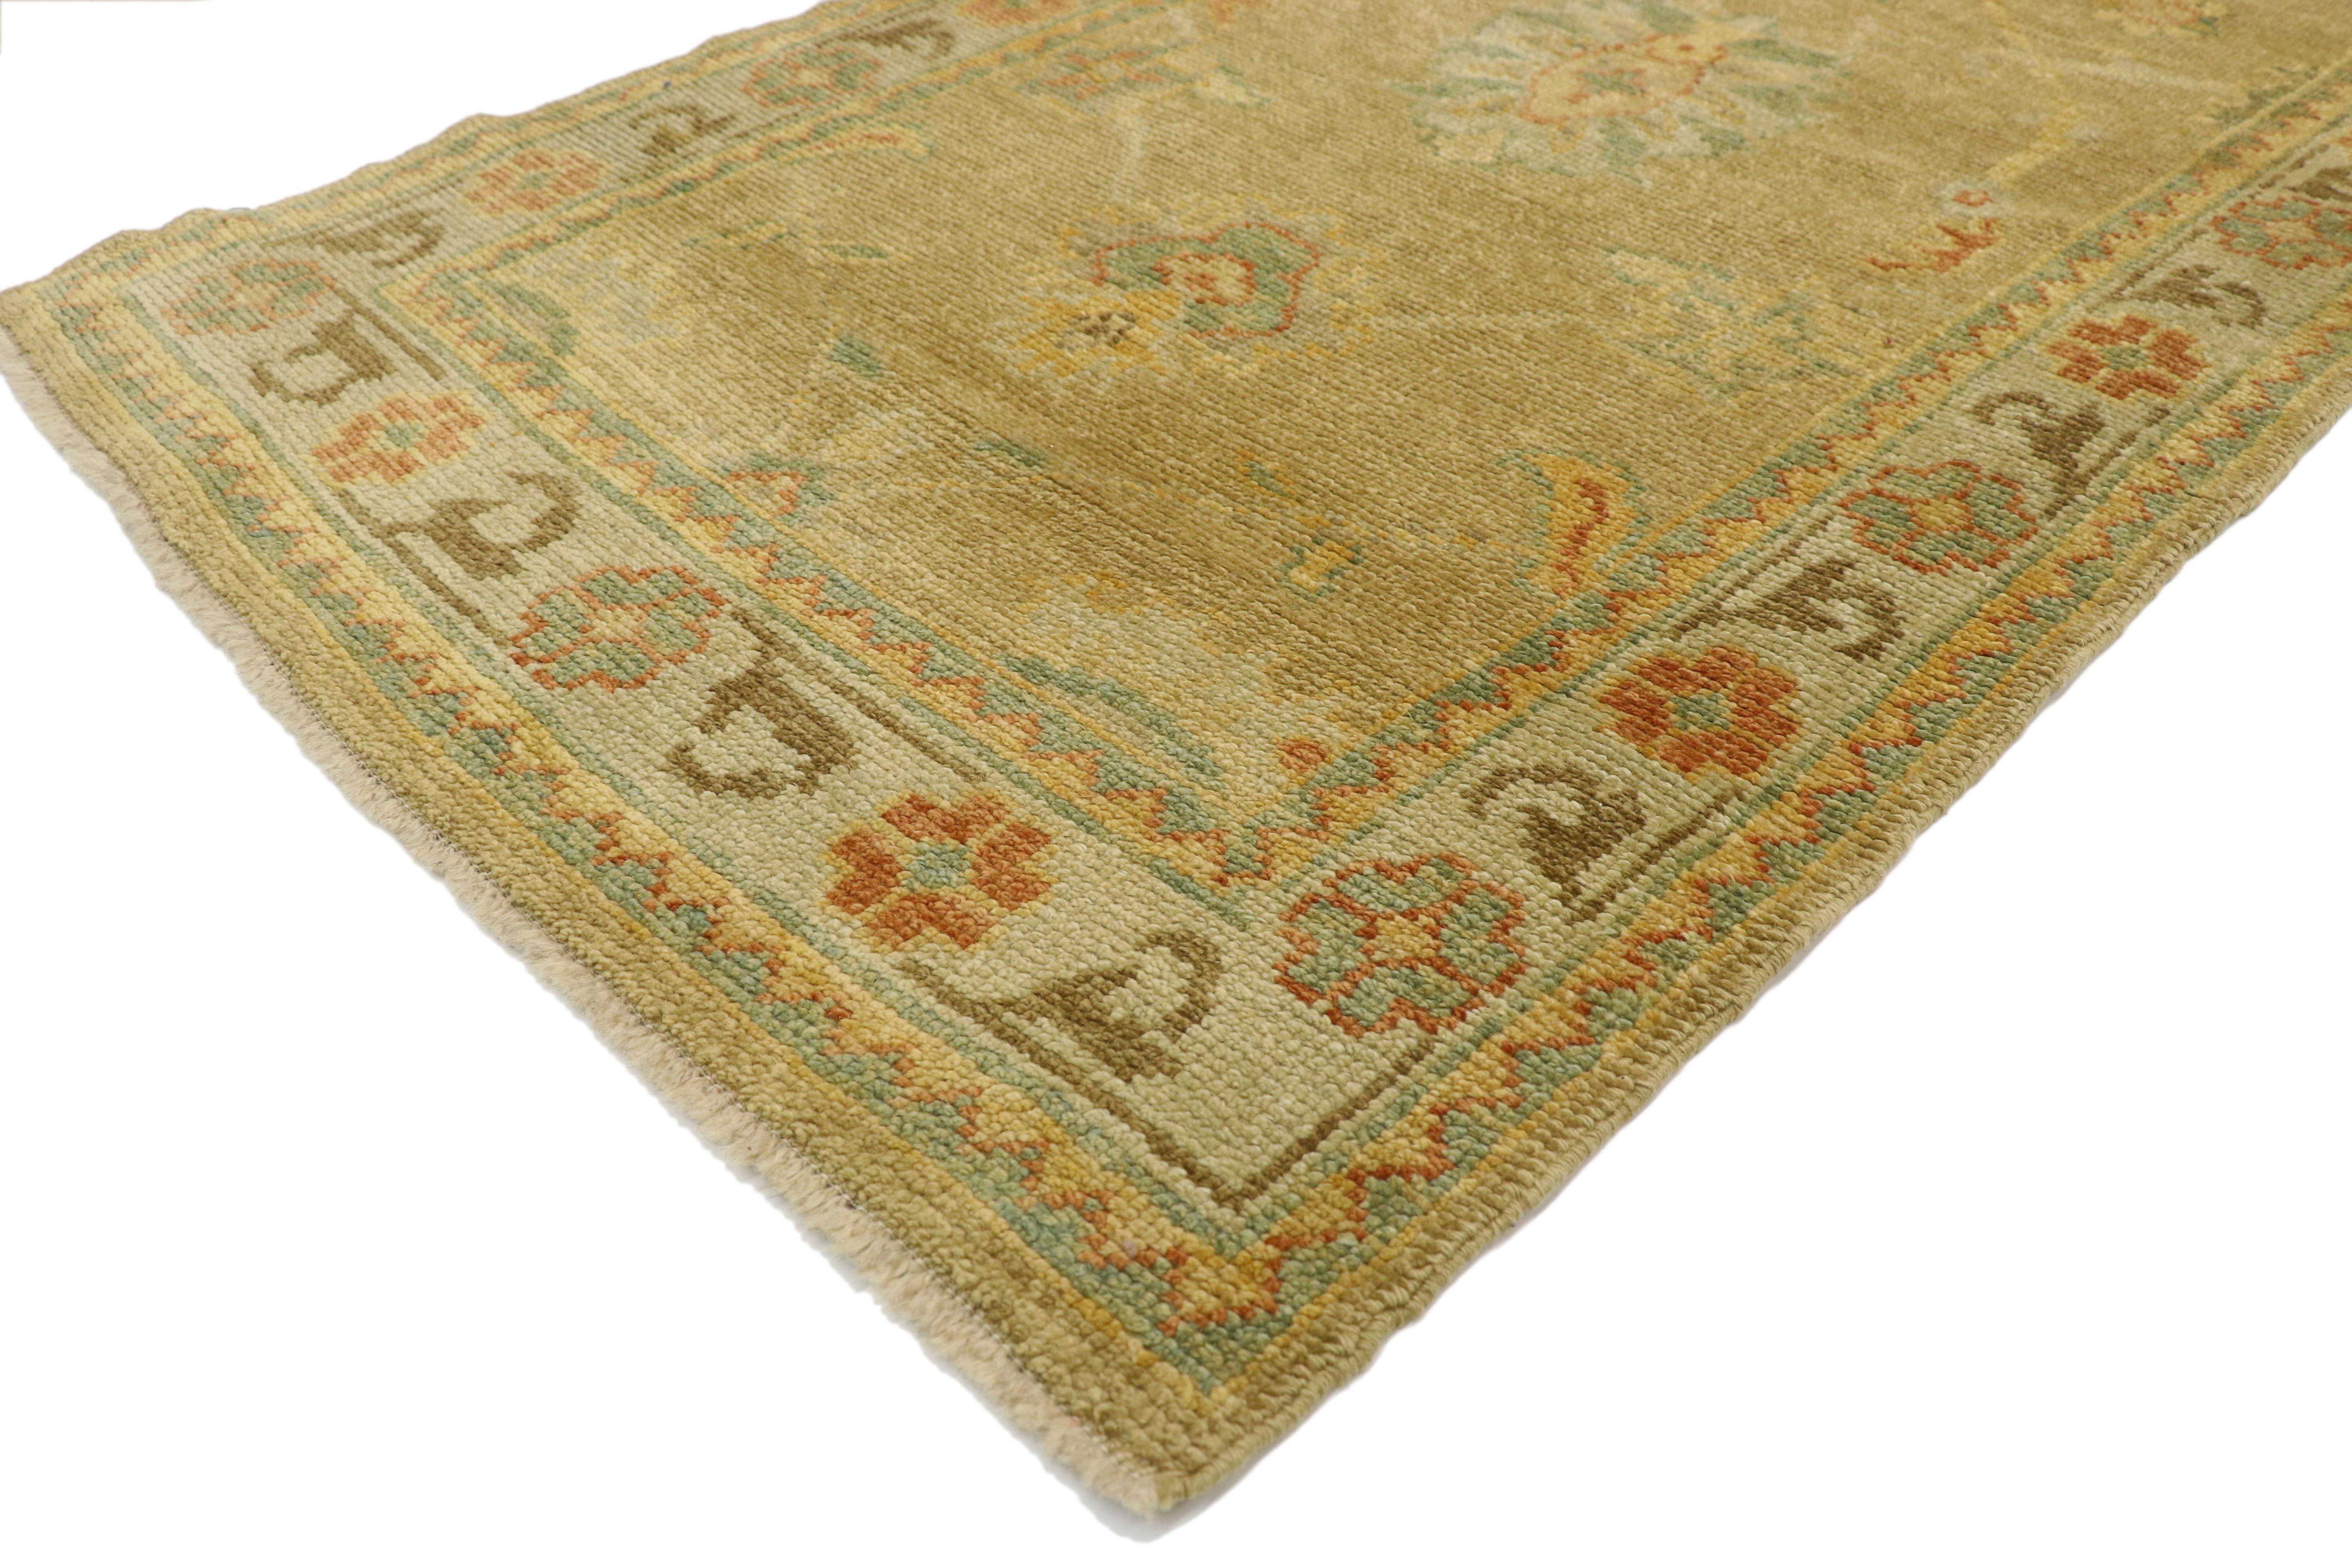 50538 Turkish Oushak runner with warm Tuscan Mediterranean style, Long Hallway Runner . Warm Mediterranean style and rustic refinement merge beautifully in this Turkish Oushak runner. Elegantly artistic and timeless, the field is covered in an